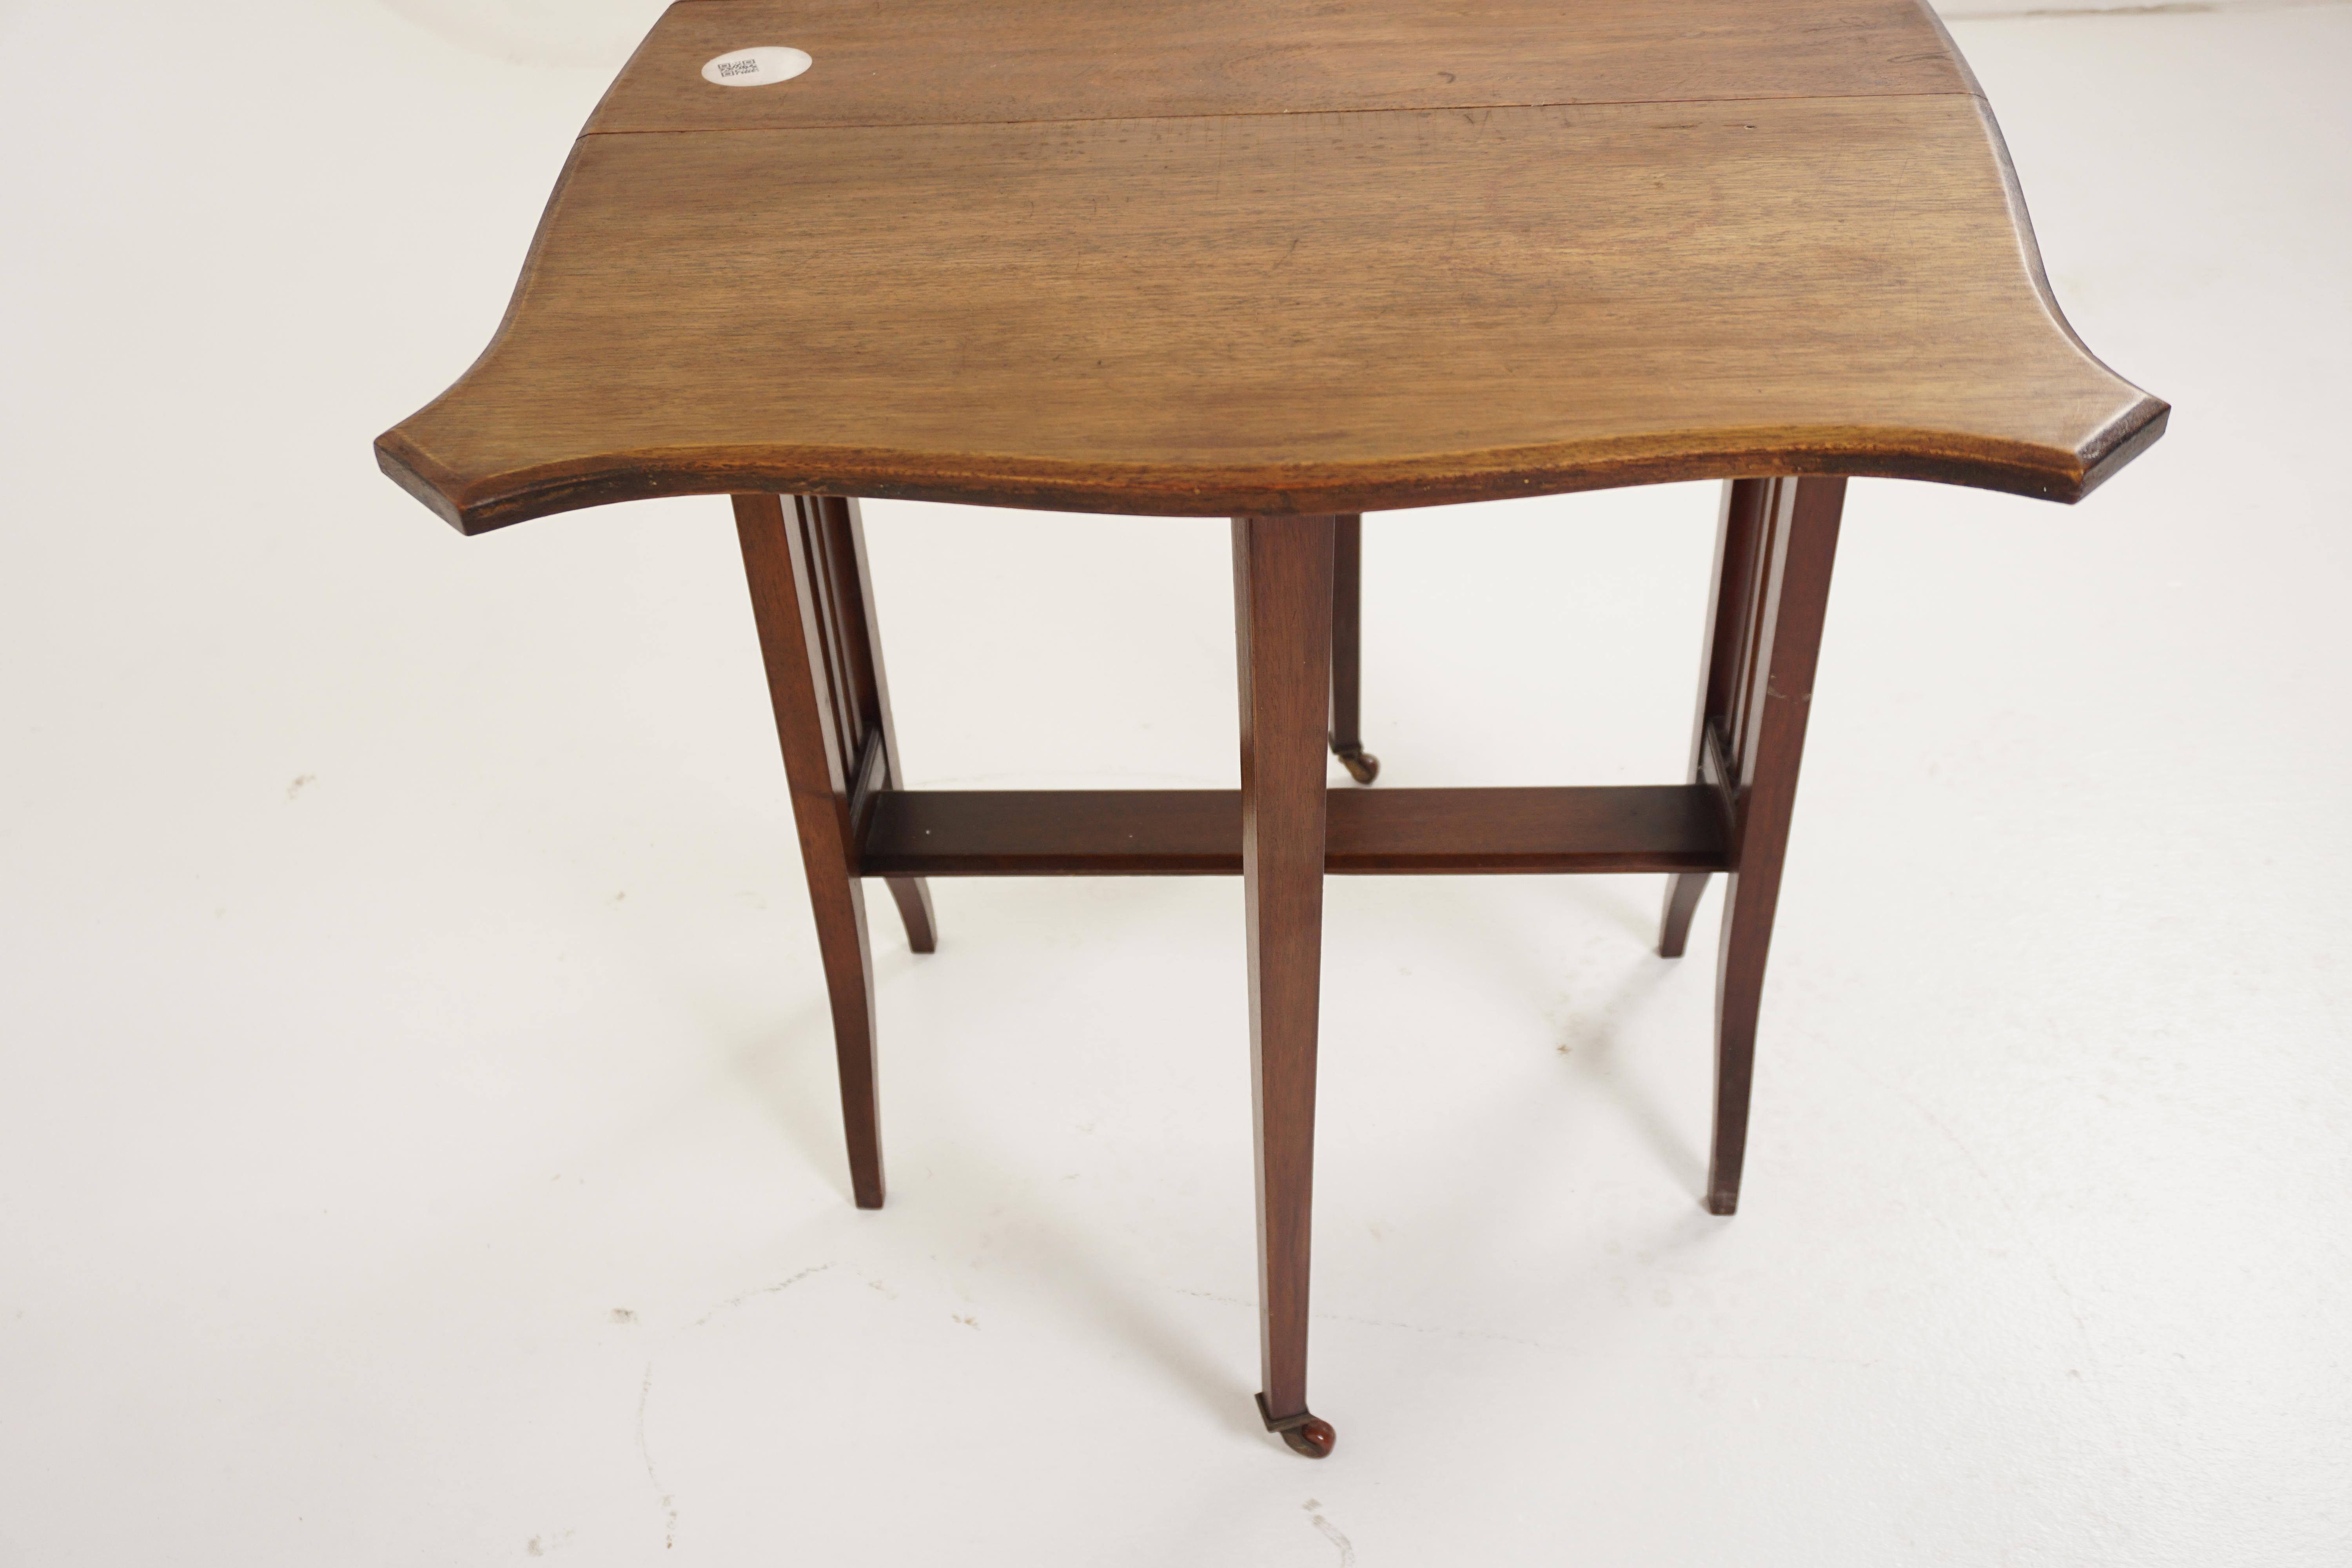 Early 20th Century Antique Walnut Table, Sutherland Drop Leaf Side Table, Scotland 1920, H1079A